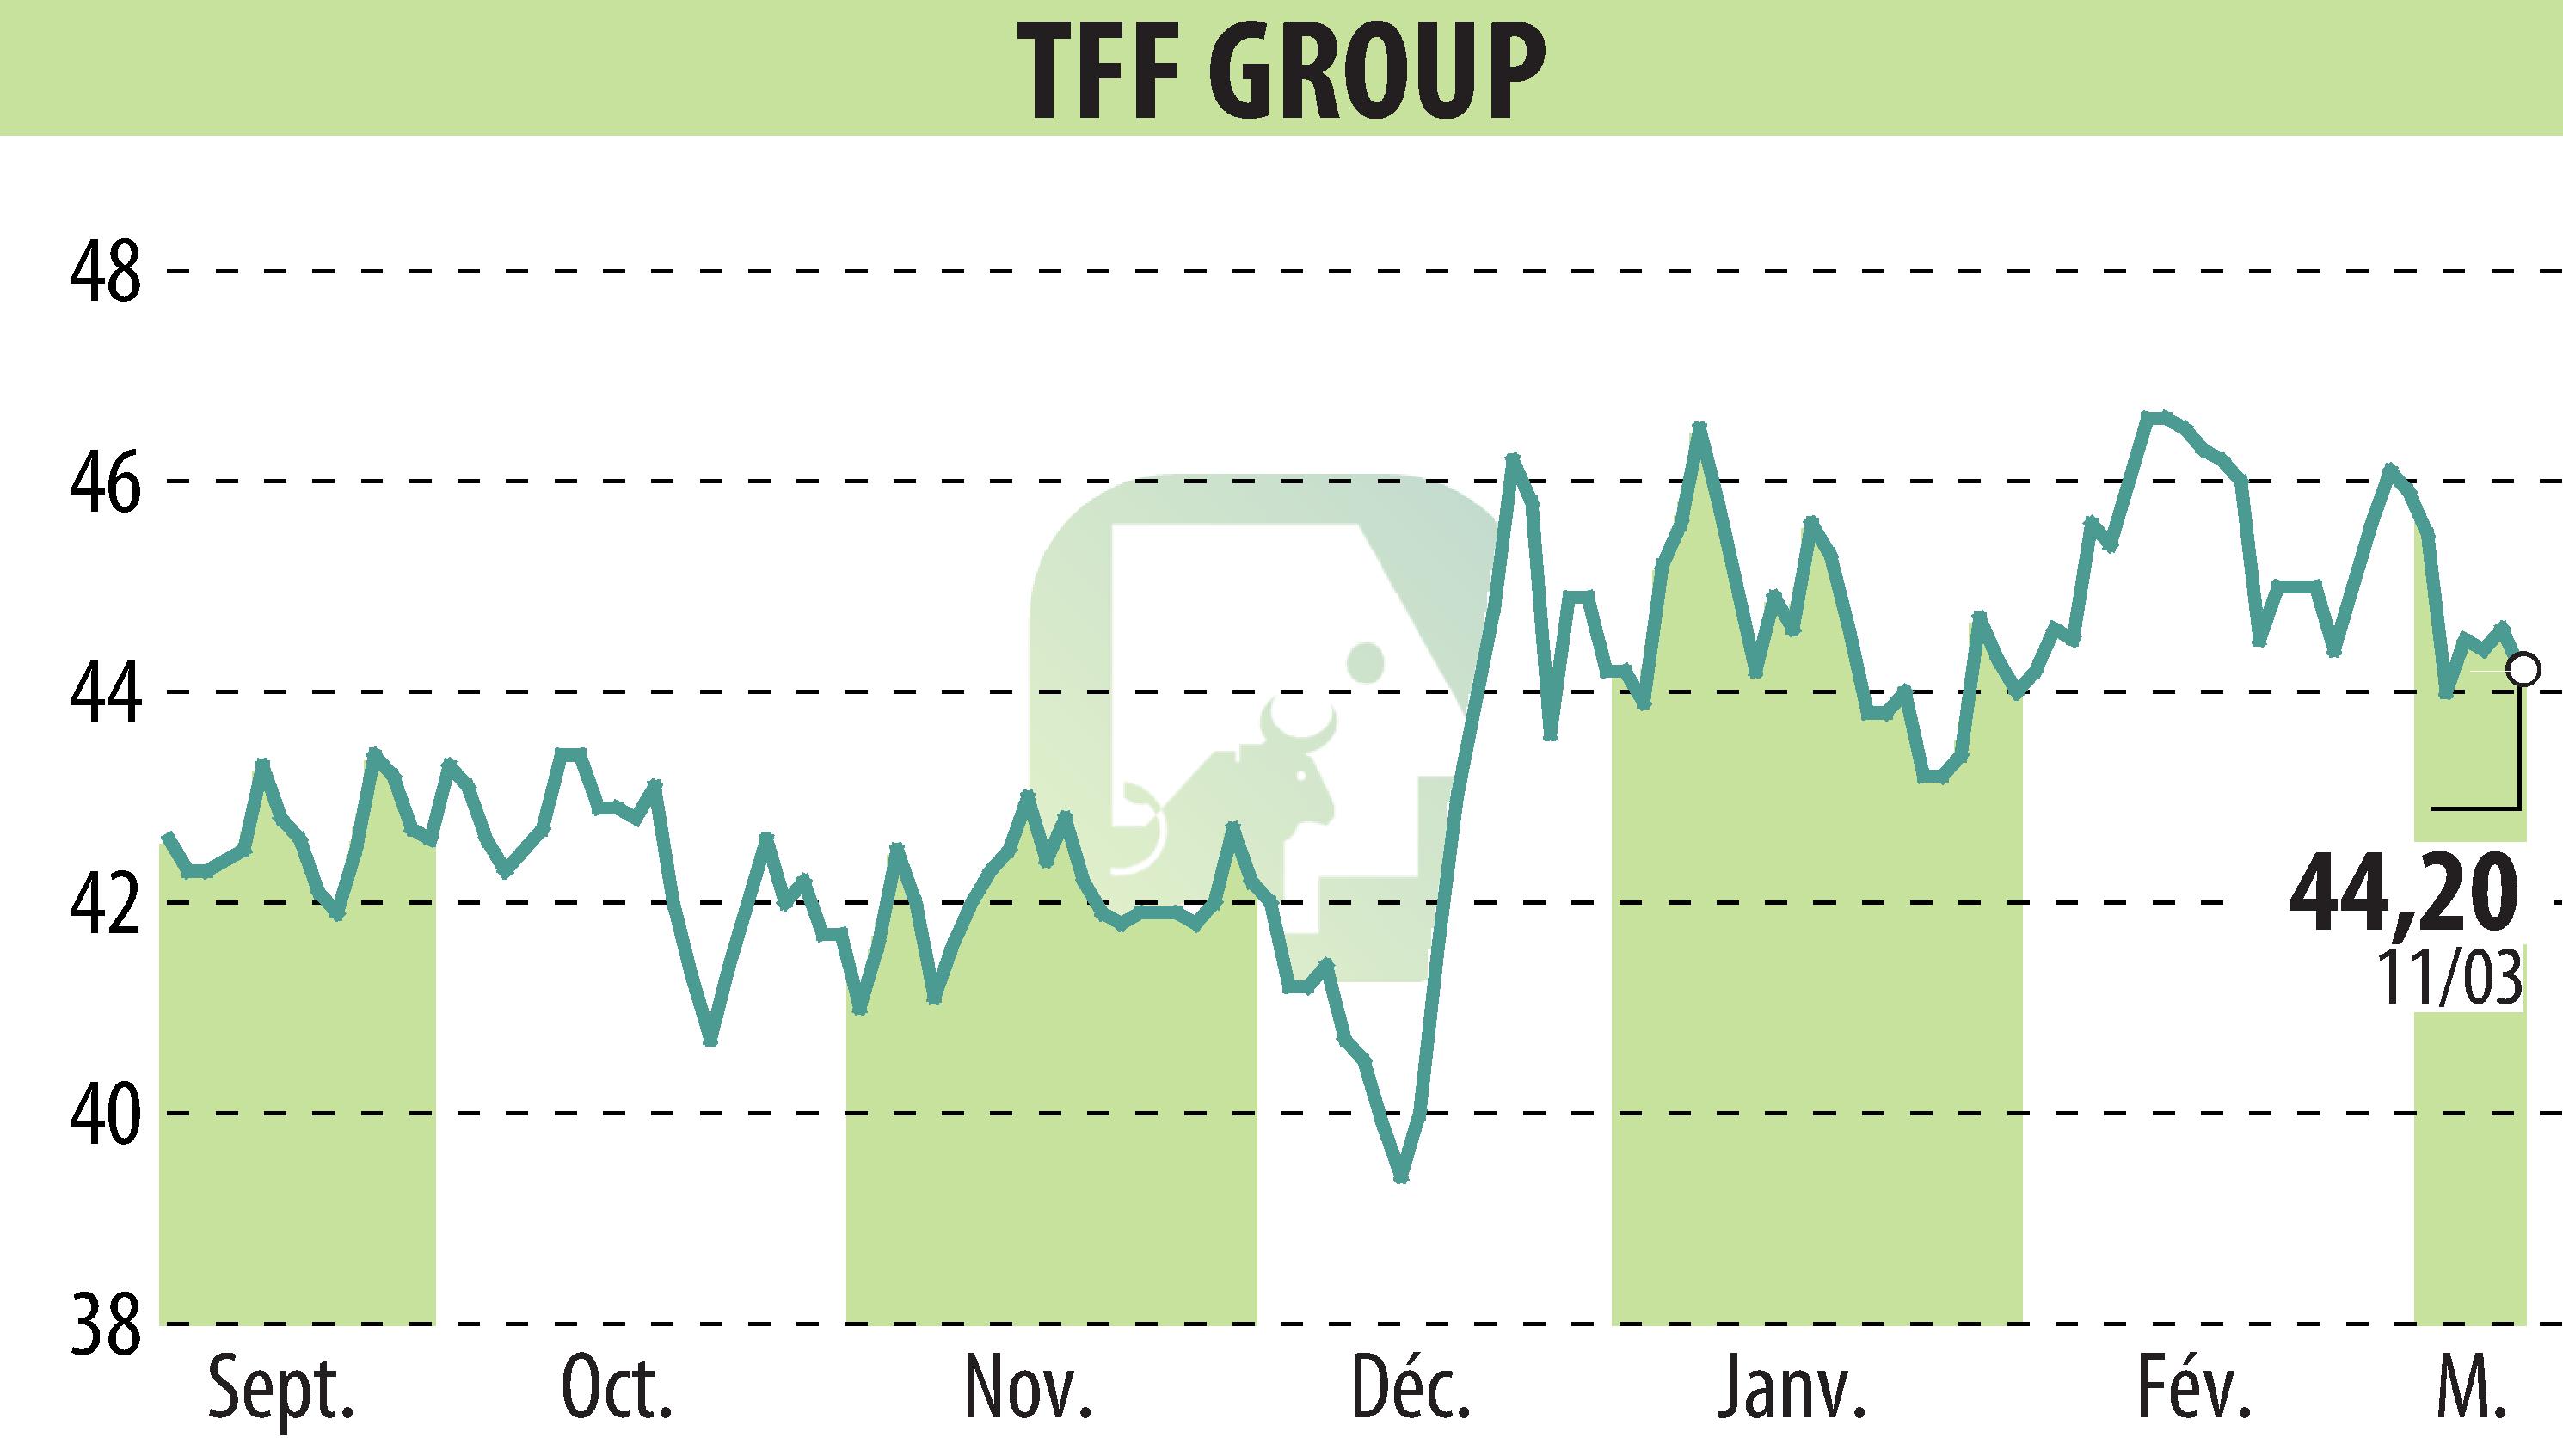 Stock price chart of TONNELERIE FRANCOIS FRERES (EPA:TFF) showing fluctuations.